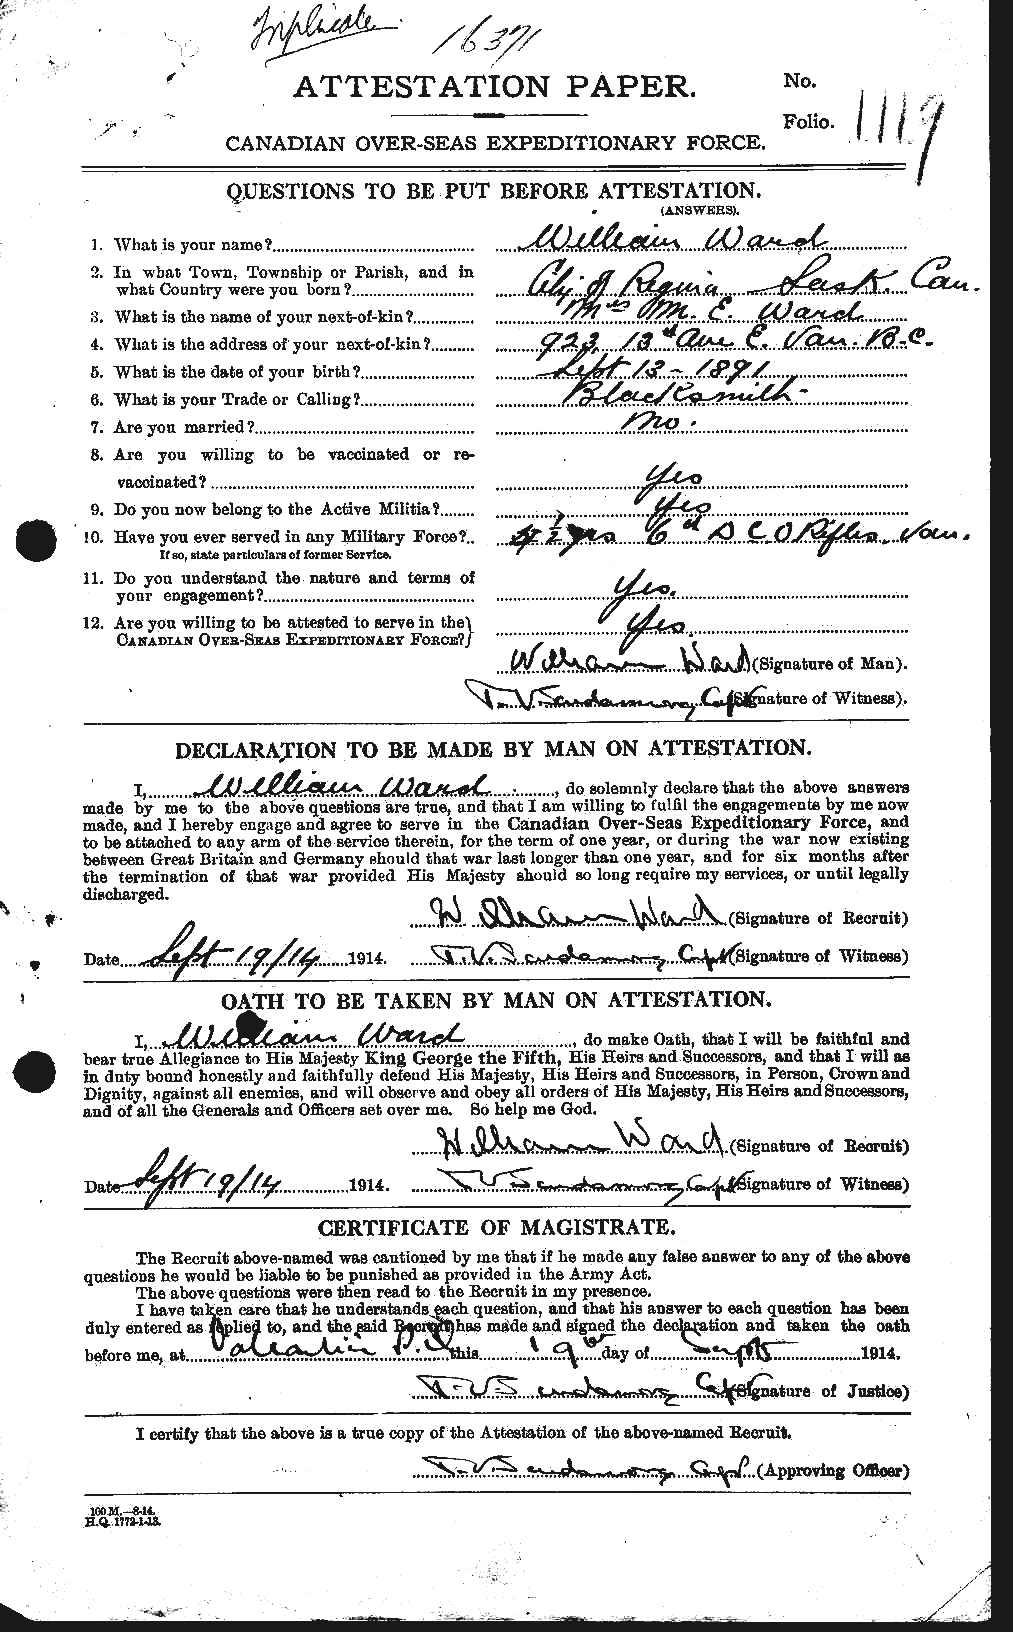 Personnel Records of the First World War - CEF 659769a